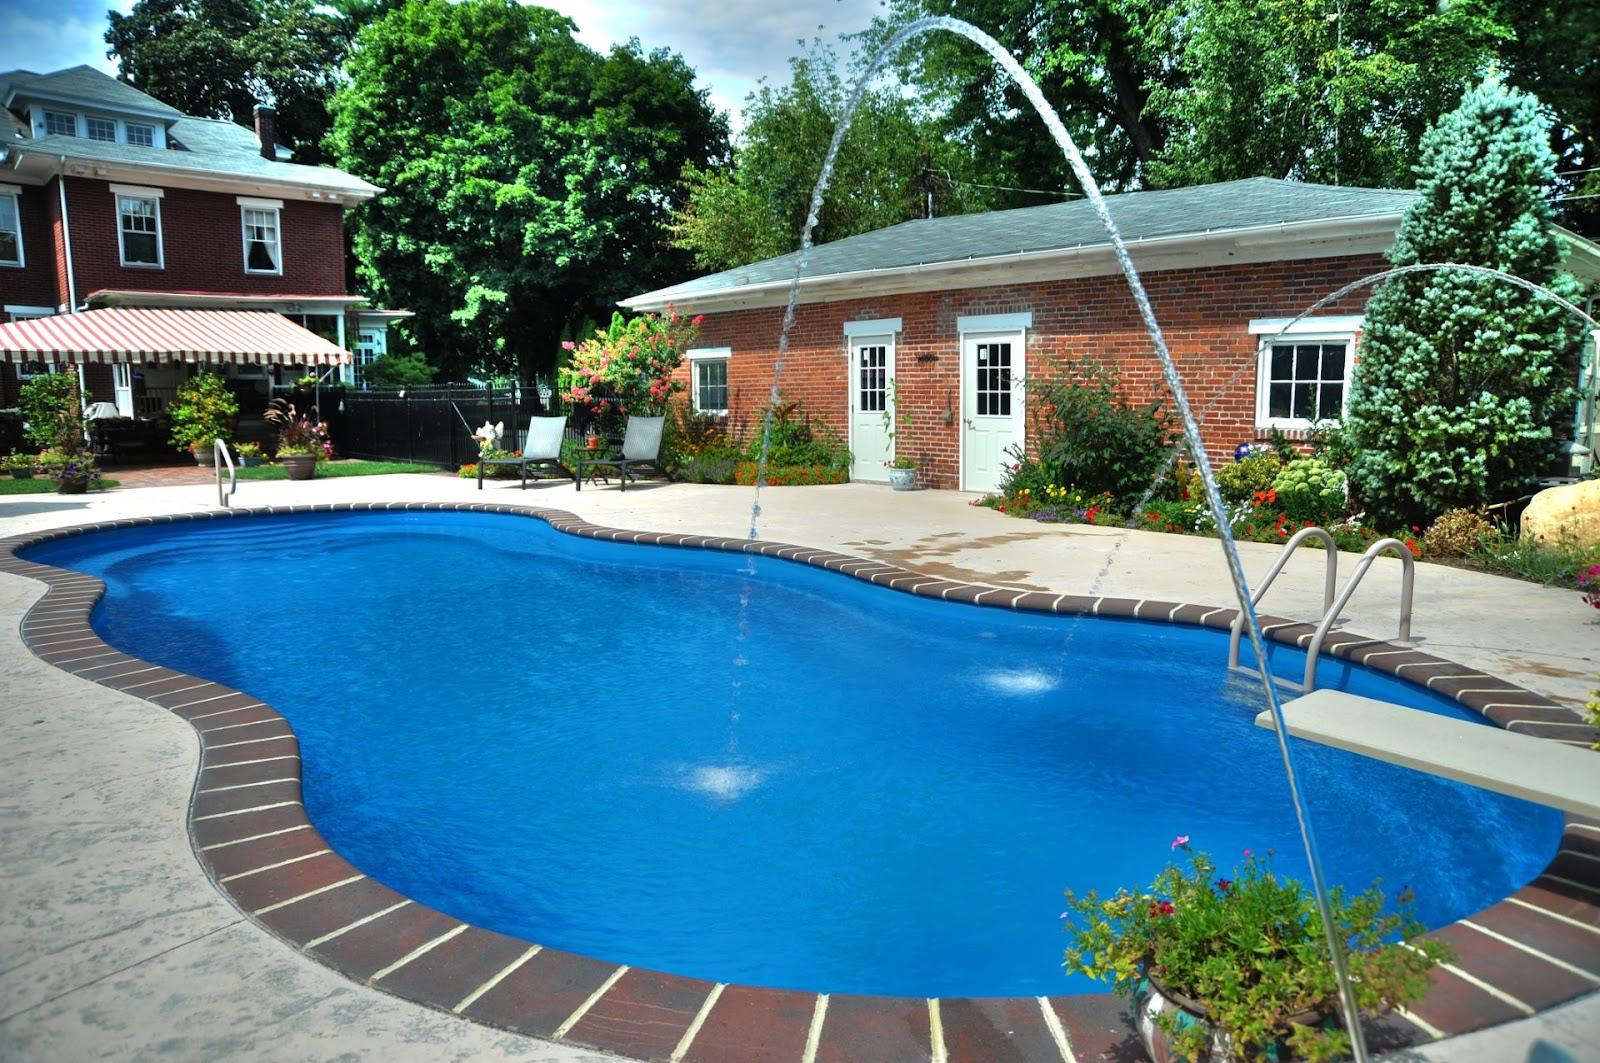 Crystal Clear Swimming Pool Water All Summer? Yes!